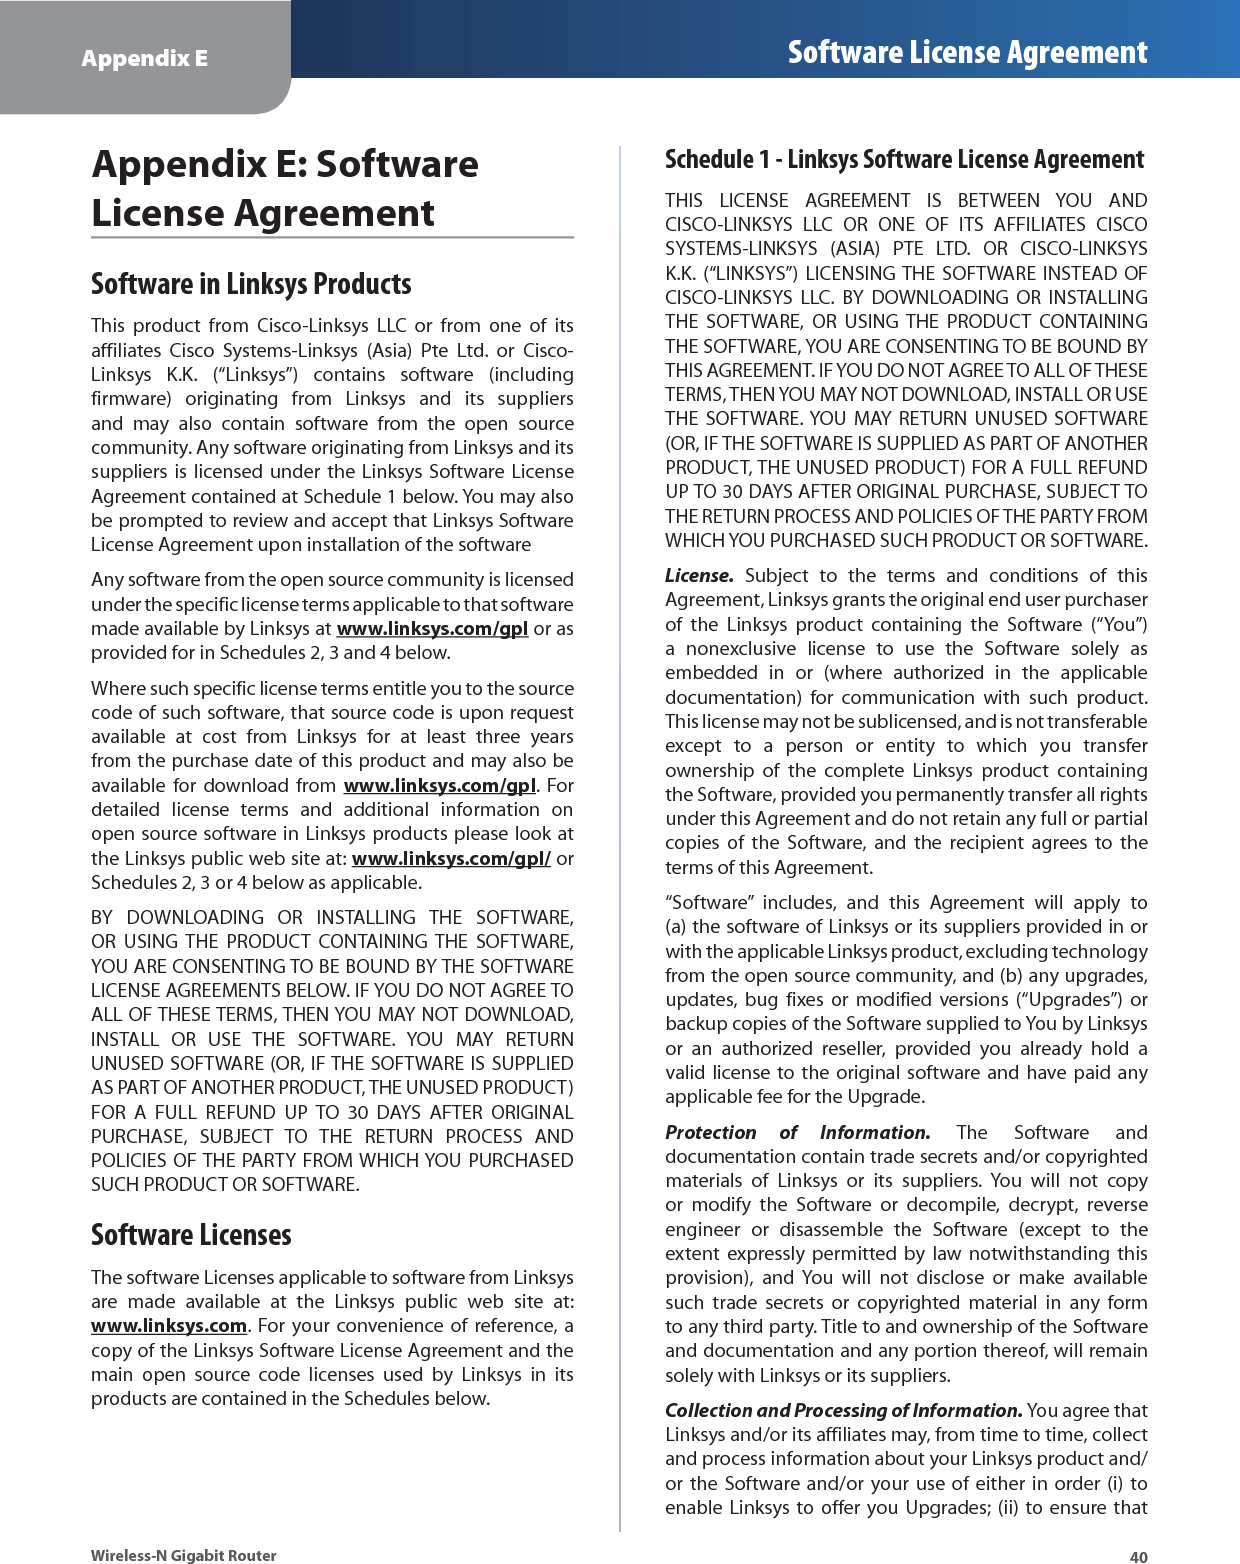 40Appendix E Software License AgreementWireless-N Gigabit RouterAppendix E: Software License AgreementSoftware in Linksys ProductsThis product from Cisco-Linksys LLC or from one of its affiliates Cisco Systems-Linksys (Asia) Pte Ltd. or Cisco-Linksys K.K. (“Linksys”) contains software (including firmware) originating from Linksys and its suppliers and may also contain software from the open source community. Any software originating from Linksys and its suppliers is licensed under the Linksys Software License Agreement contained at Schedule 1 below. You may also be prompted to review and accept that Linksys Software License Agreement upon installation of the softwareAny software from the open source community is licensed under the specific license terms applicable to that software made available by Linksys at www.linksys.com/gpl or as provided for in Schedules 2, 3 and 4 below.Where such specific license terms entitle you to the source code of such software, that source code is upon request available at cost from Linksys for at least three years from the purchase date of this product and may also be available for download from www.linksys.com/gpl. For detailed license terms and additional information on open source software in Linksys products please look at the Linksys public web site at: www.linksys.com/gpl/ or Schedules 2, 3 or 4 below as applicable.BY DOWNLOADING OR INSTALLING THE SOFTWARE, OR USING THE PRODUCT CONTAINING THE SOFTWARE, YOU ARE CONSENTING TO BE BOUND BY THE SOFTWARE LICENSE AGREEMENTS BELOW. IF YOU DO NOT AGREE TO ALL OF THESE TERMS, THEN YOU MAY NOT DOWNLOAD, INSTALL OR USE THE SOFTWARE. YOU MAY RETURN UNUSED SOFTWARE (OR, IF THE SOFTWARE IS SUPPLIED AS PART OF ANOTHER PRODUCT, THE UNUSED PRODUCT) FOR A FULL REFUND UP TO 30 DAYS AFTER ORIGINAL PURCHASE, SUBJECT TO THE RETURN PROCESS AND POLICIES OF THE PARTY FROM WHICH YOU PURCHASED SUCH PRODUCT OR SOFTWARE.Software LicensesThe software Licenses applicable to software from Linksys are made available at the Linksys public web site at: www.linksys.com. For your convenience of reference, a copy of the Linksys Software License Agreement and the main open source code licenses used by Linksys in its products are contained in the Schedules below.Schedule 1 - Linksys Software License AgreementTHIS LICENSE AGREEMENT IS BETWEEN YOU AND CISCO-LINKSYS LLC OR ONE OF ITS AFFILIATES CISCO SYSTEMS-LINKSYS (ASIA) PTE LTD. OR CISCO-LINKSYS K.K. (“LINKSYS”) LICENSING THE SOFTWARE INSTEAD OF CISCO-LINKSYS LLC. BY DOWNLOADING OR INSTALLING THE SOFTWARE, OR USING THE PRODUCT CONTAINING THE SOFTWARE, YOU ARE CONSENTING TO BE BOUND BY THIS AGREEMENT. IF YOU DO NOT AGREE TO ALL OF THESE TERMS, THEN YOU MAY NOT DOWNLOAD, INSTALL OR USE THE SOFTWARE. YOU MAY RETURN UNUSED SOFTWARE (OR, IF THE SOFTWARE IS SUPPLIED AS PART OF ANOTHER PRODUCT, THE UNUSED PRODUCT) FOR A FULL REFUND UP TO 30 DAYS AFTER ORIGINAL PURCHASE, SUBJECT TO THE RETURN PROCESS AND POLICIES OF THE PARTY FROM WHICH YOU PURCHASED SUCH PRODUCT OR SOFTWARE.License. Subject to the terms and conditions of this Agreement, Linksys grants the original end user purchaser of the Linksys product containing the Software (“You”) a nonexclusive license to use the Software solely as embedded in or (where authorized in the applicable documentation) for communication with such product. This license may not be sublicensed, and is not transferable except to a person or entity to which you transfer ownership of the complete Linksys product containing the Software, provided you permanently transfer all rights under this Agreement and do not retain any full or partial copies of the Software, and the recipient agrees to the terms of this Agreement.“Software” includes, and this Agreement will apply to (a) the software of Linksys or its suppliers provided in or with the applicable Linksys product, excluding technology from the open source community, and (b) any upgrades, updates, bug fixes or modified versions (“Upgrades”) or backup copies of the Software supplied to You by Linksys or an authorized reseller, provided you already hold a valid license to the original software and have paid any applicable fee for the Upgrade.Protection of Information. The Software and documentation contain trade secrets and/or copyrighted materials of Linksys or its suppliers. You will not copy or modify the Software or decompile, decrypt, reverse engineer or disassemble the Software (except to the extent expressly permitted by law notwithstanding this provision), and You will not disclose or make available such trade secrets or copyrighted material in any form to any third party. Title to and ownership of the Software and documentation and any portion thereof, will remain solely with Linksys or its suppliers.Collection and Processing of Information. You agree that Linksys and/or its affiliates may, from time to time, collect and process information about your Linksys product and/or the Software and/or your use of either in order (i) to enable Linksys to offer you Upgrades; (ii) to ensure that 